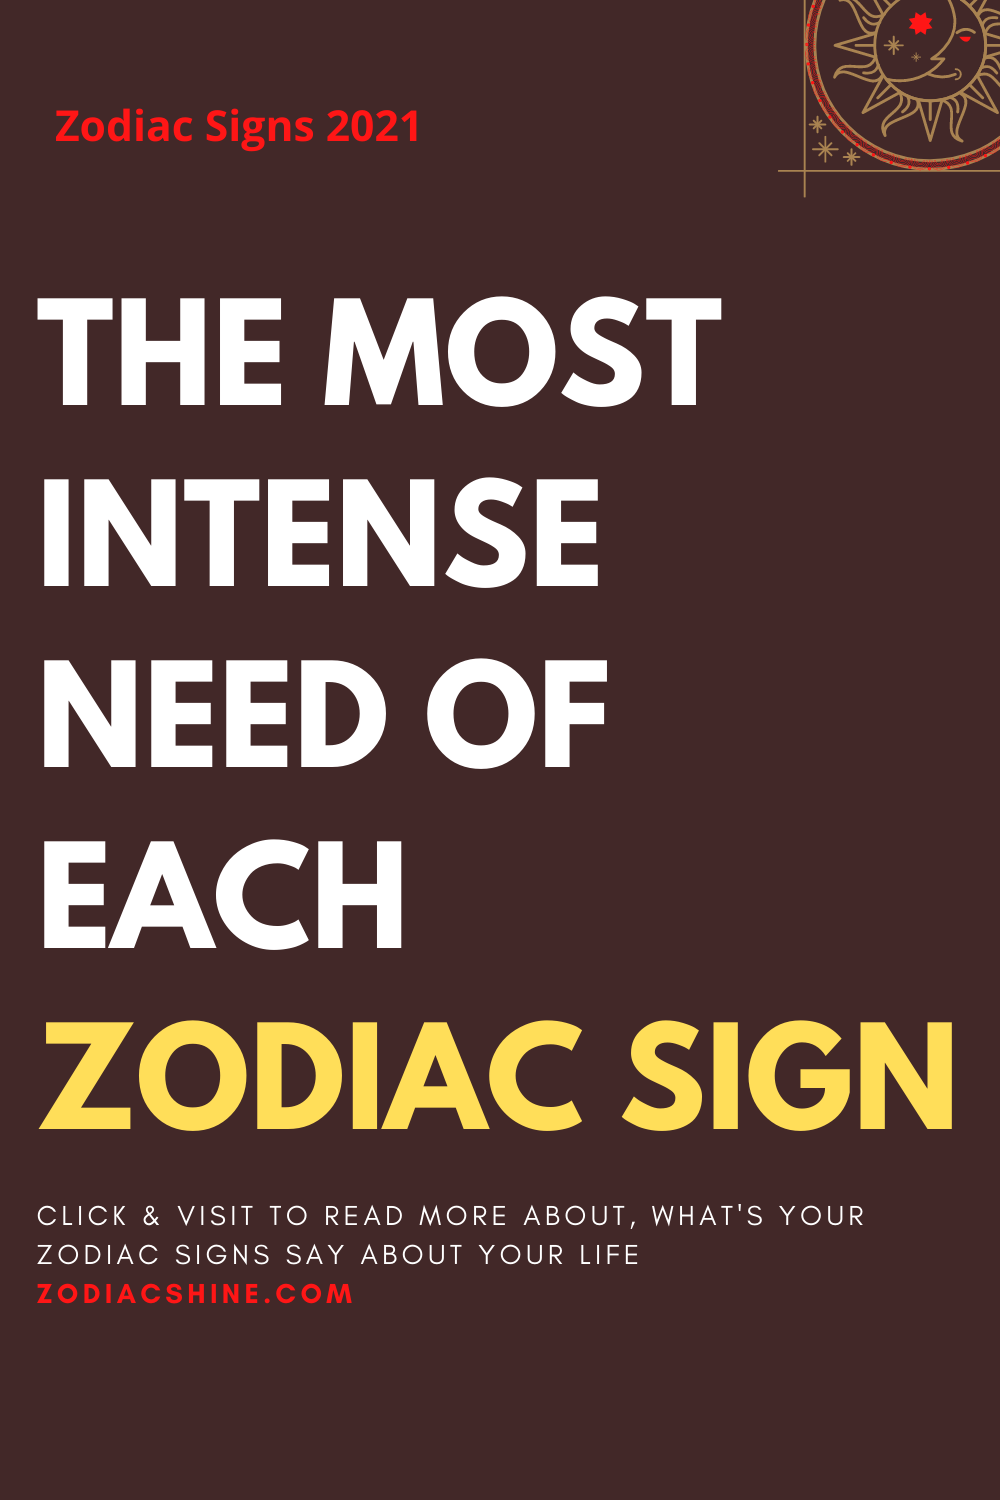 THE MOST INTENSE NEED OF EACH ZODIAC SIGN